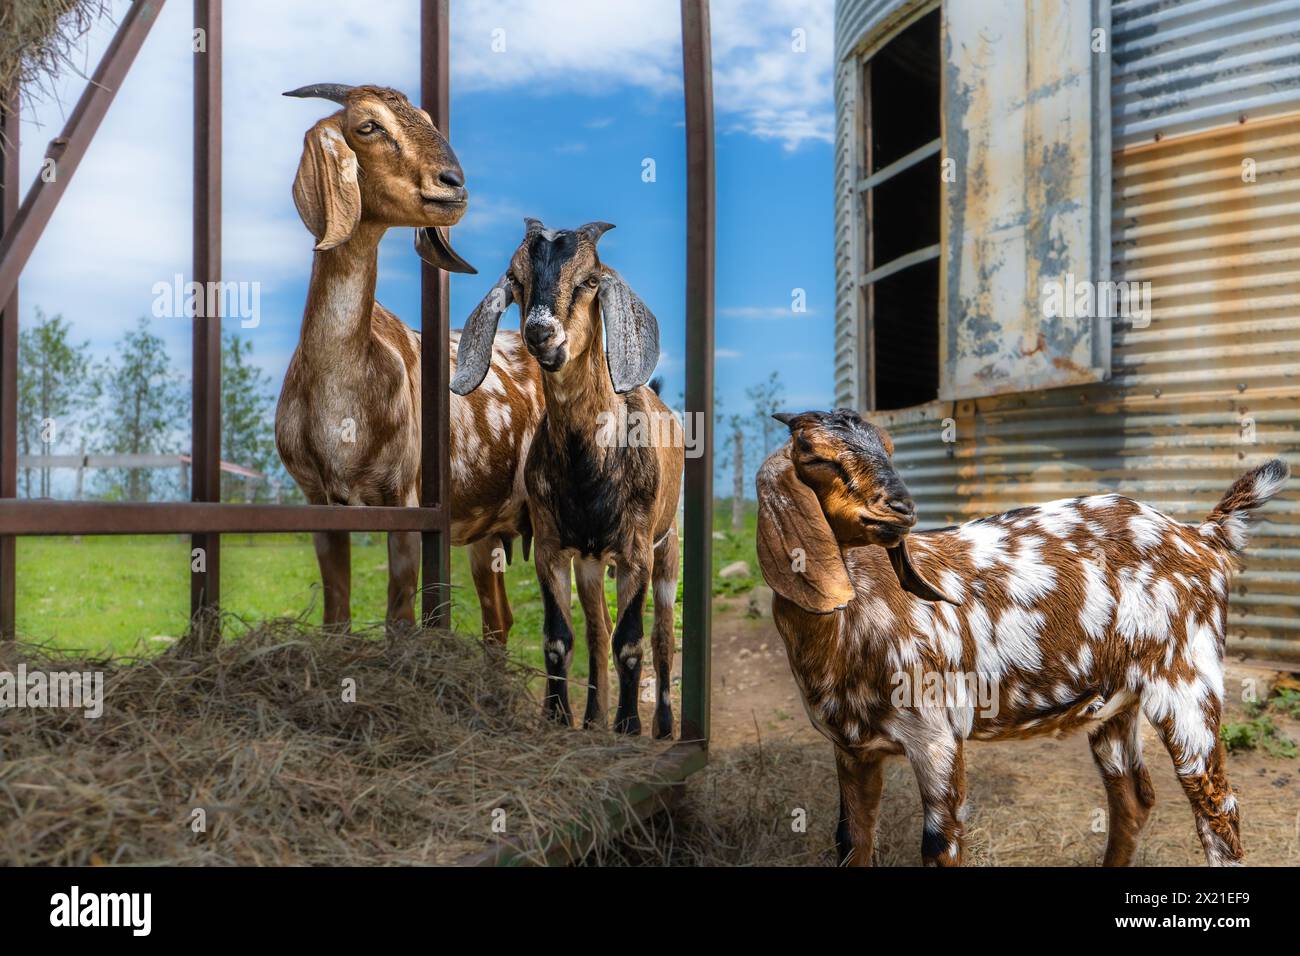 Spotted Goats, Farm Field on Cloudy Day Stock Photo